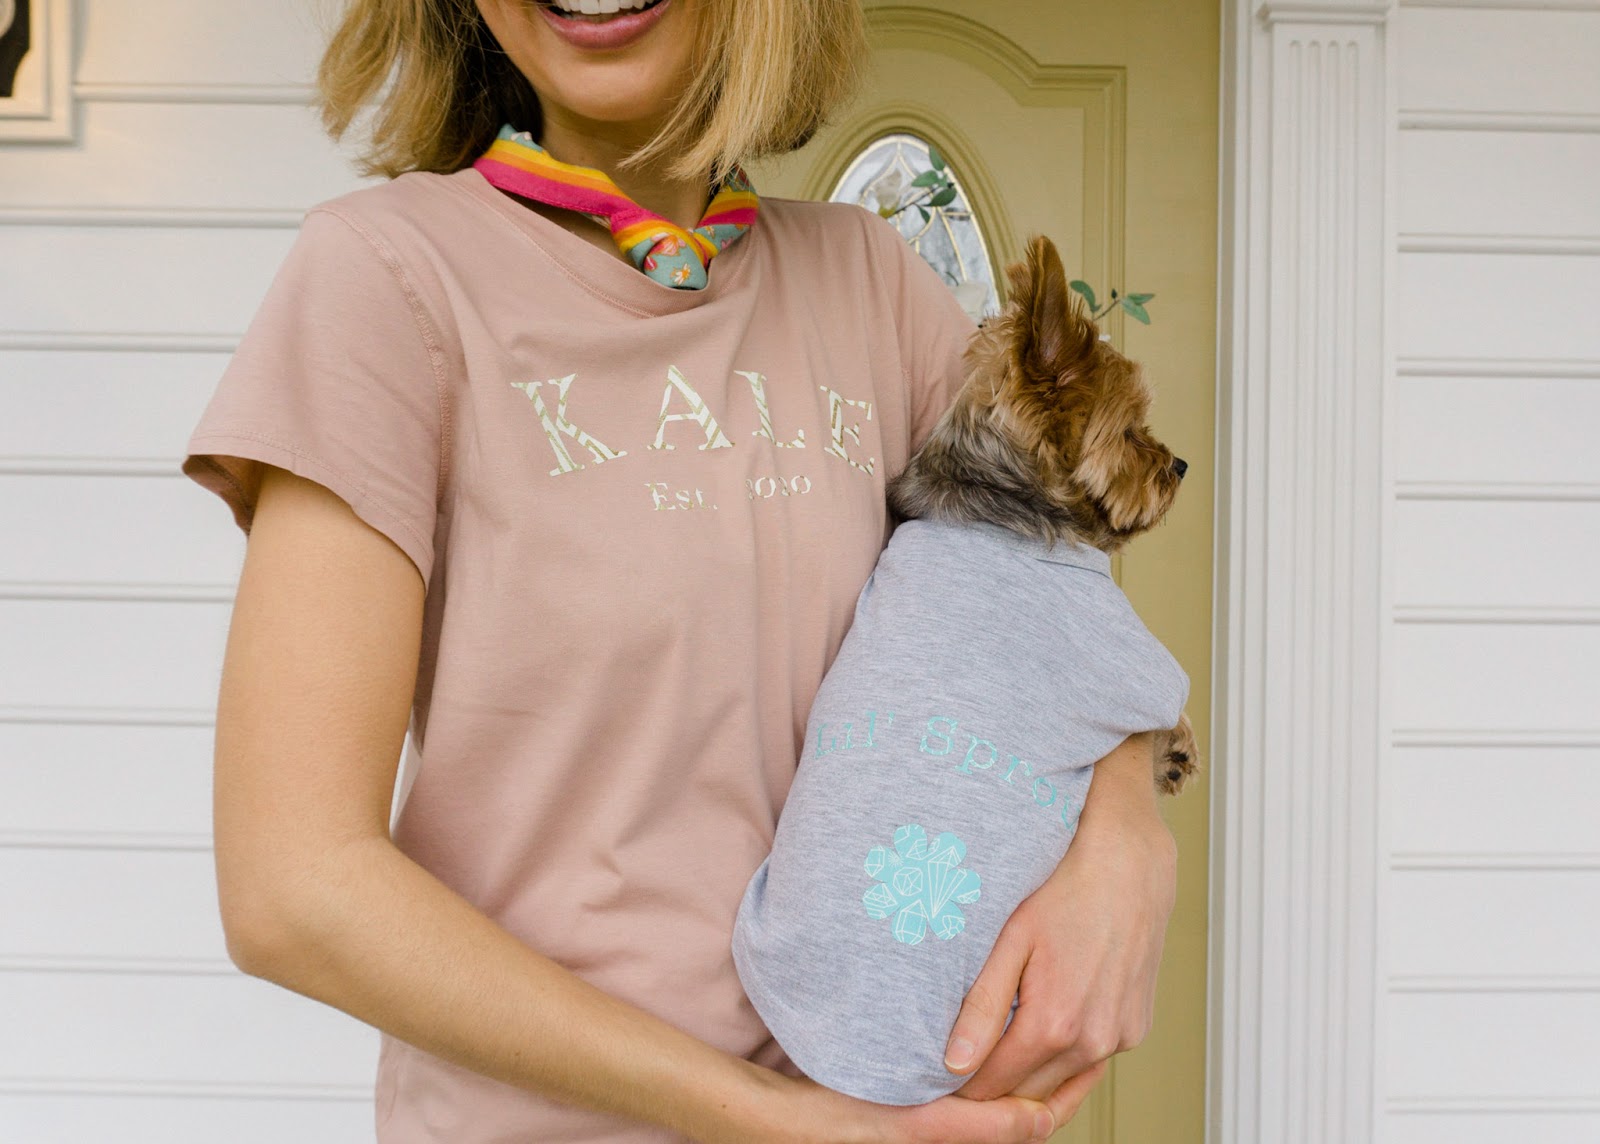 Cricut Made Diy Graphic Tee With Cricut Easypress — The Yellow Spectacles